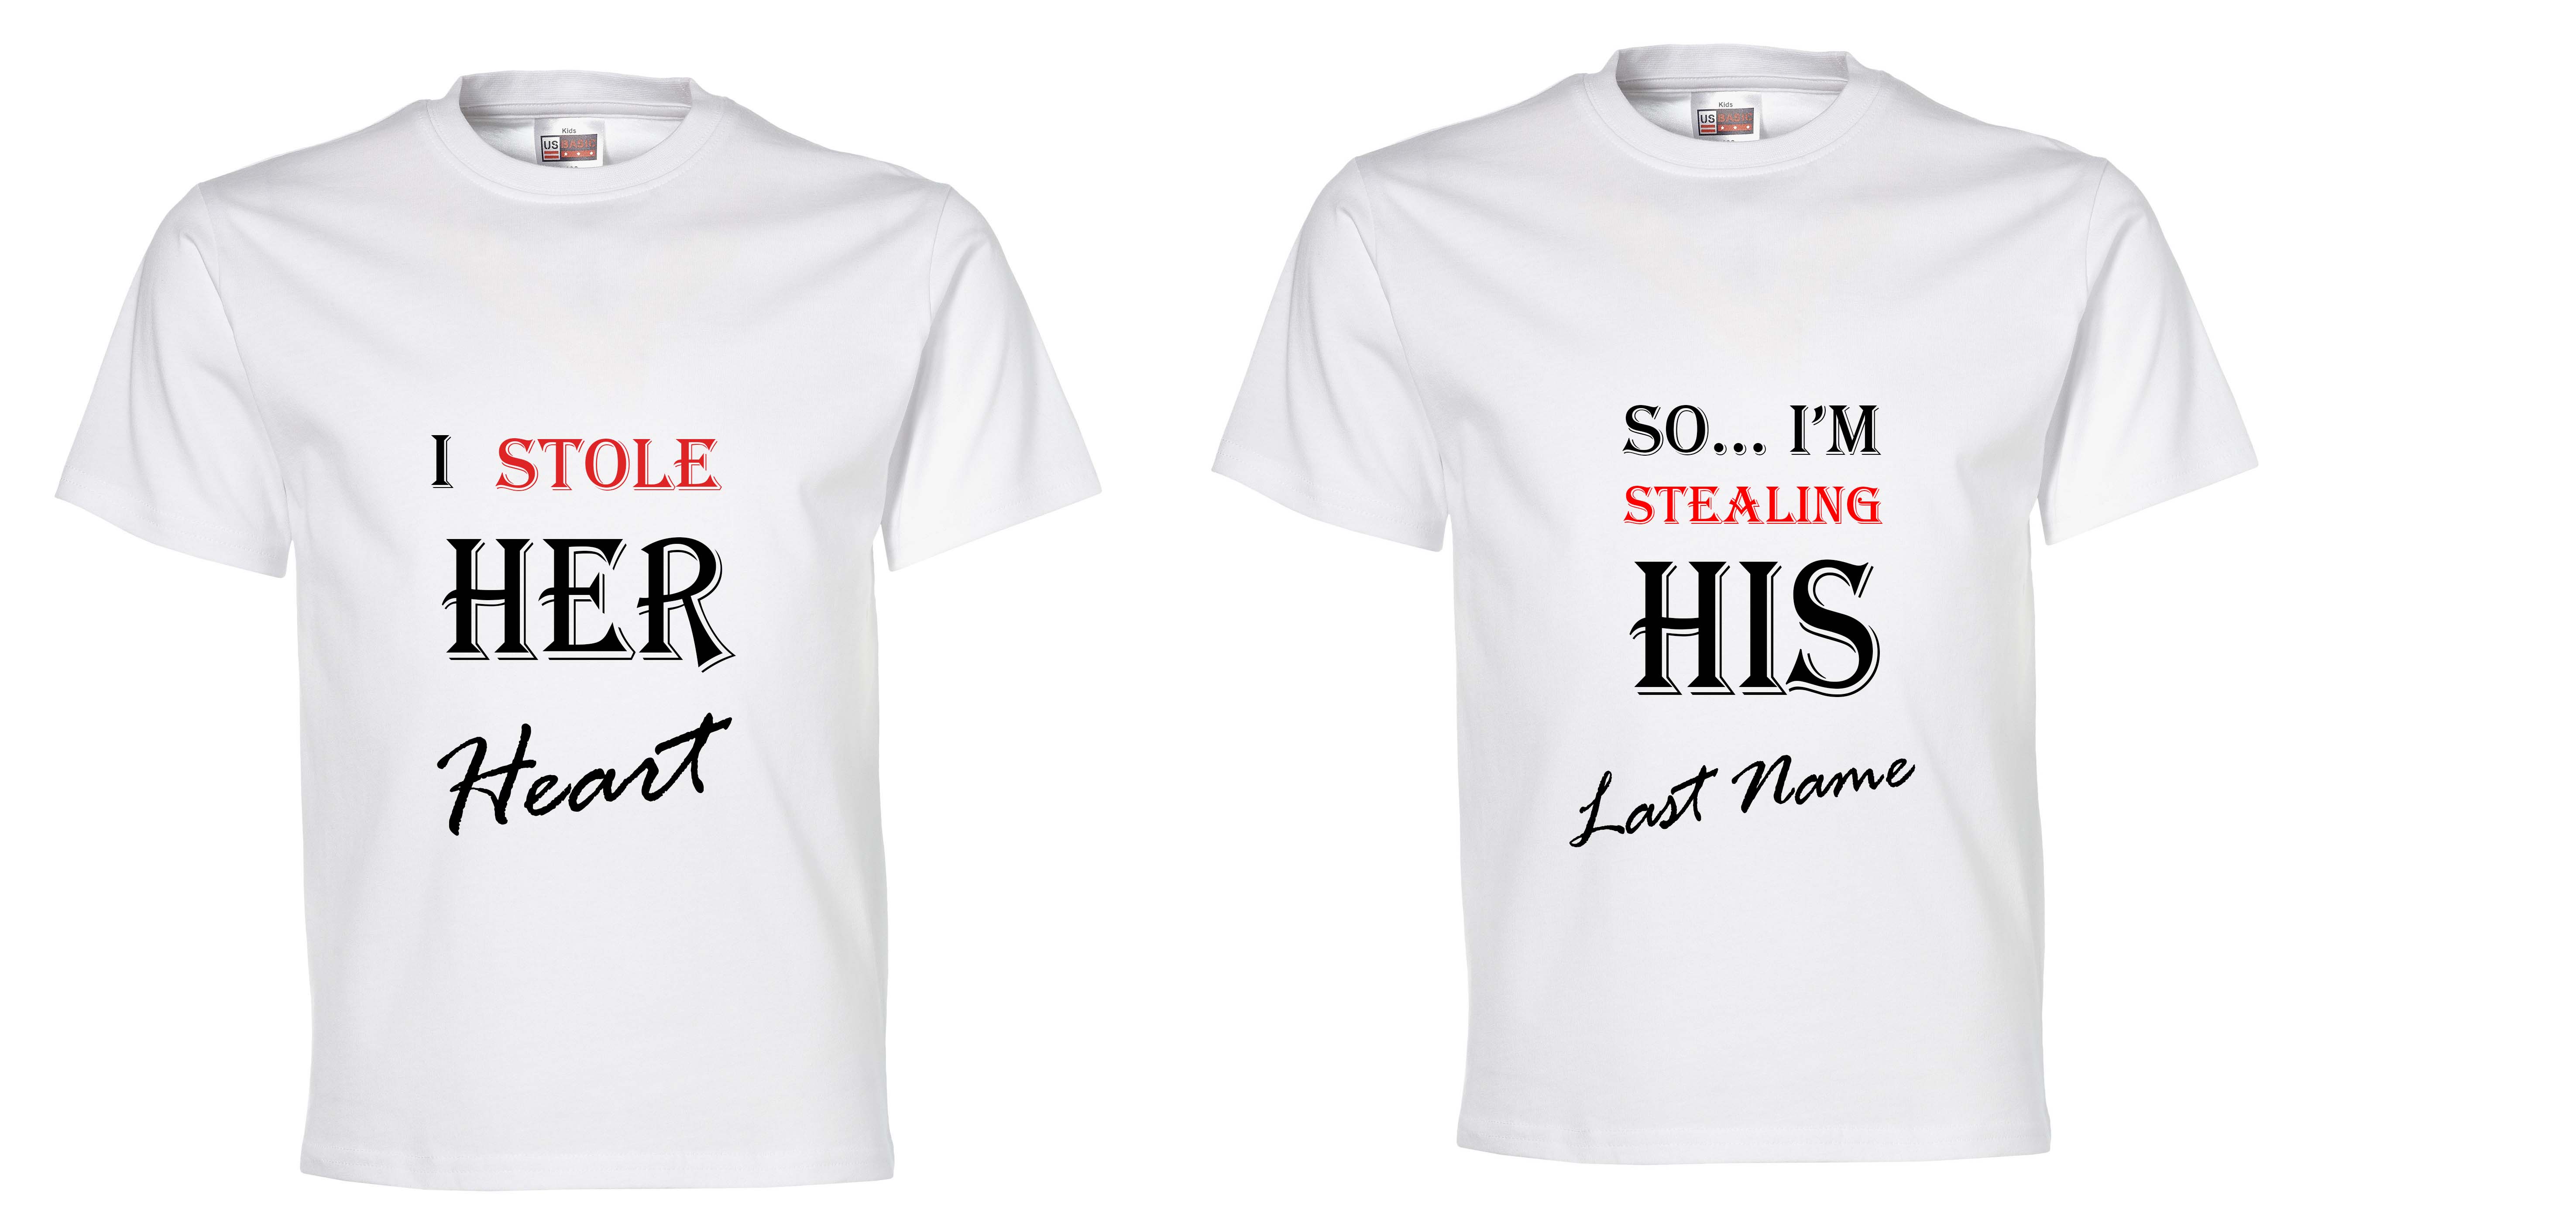 Getting married tshirts - S2 - For HIM to wear